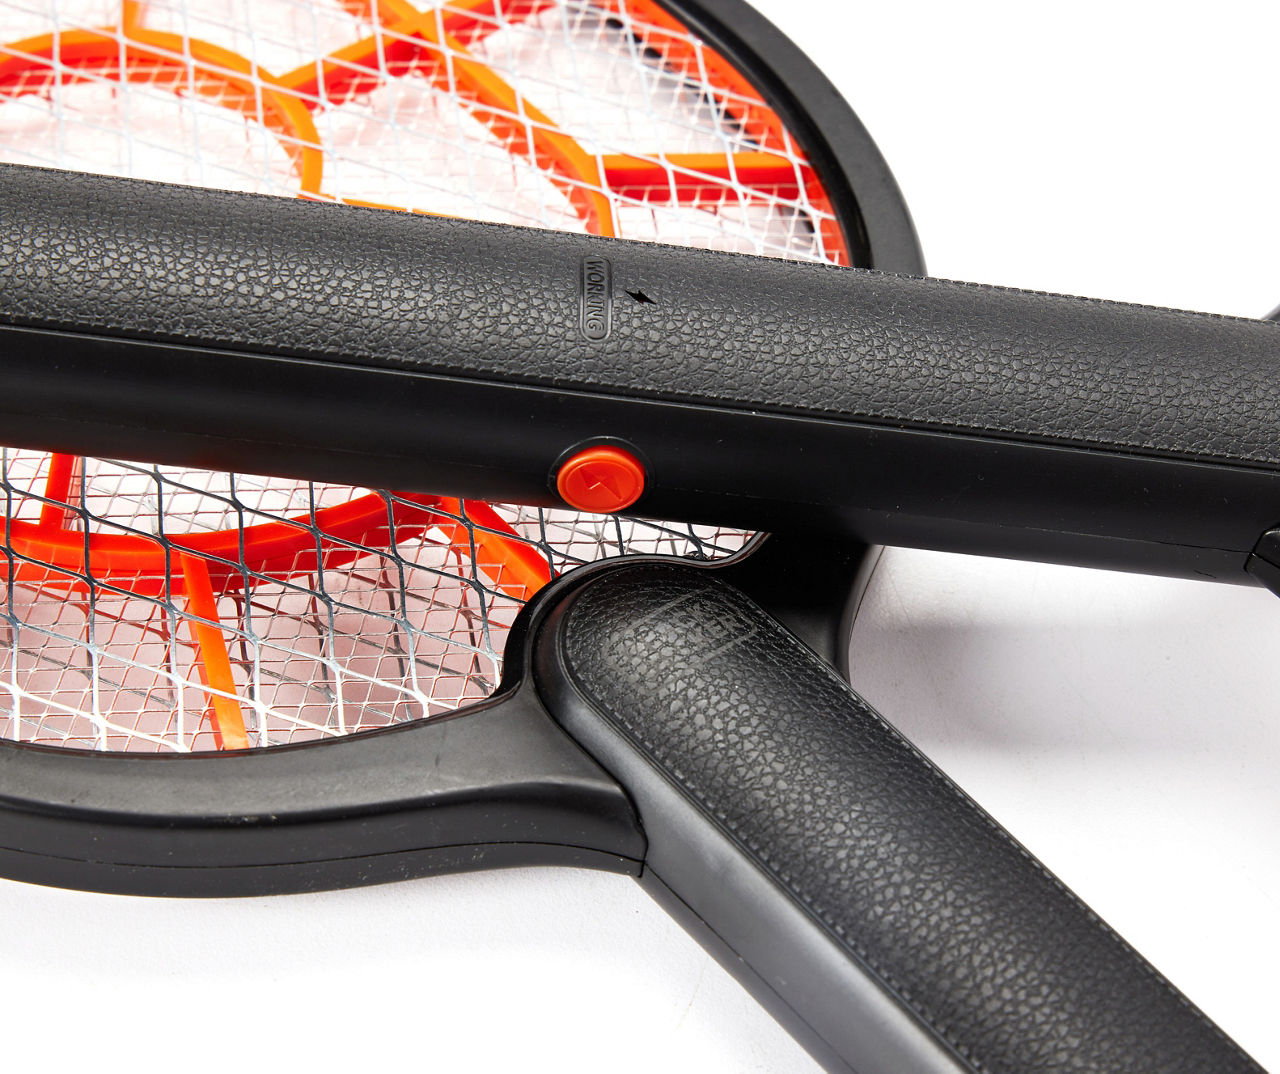 Black+decker Bug Zapper Tennis Racket, Battery Powered Zapper, Mosquito and Fly Swatter